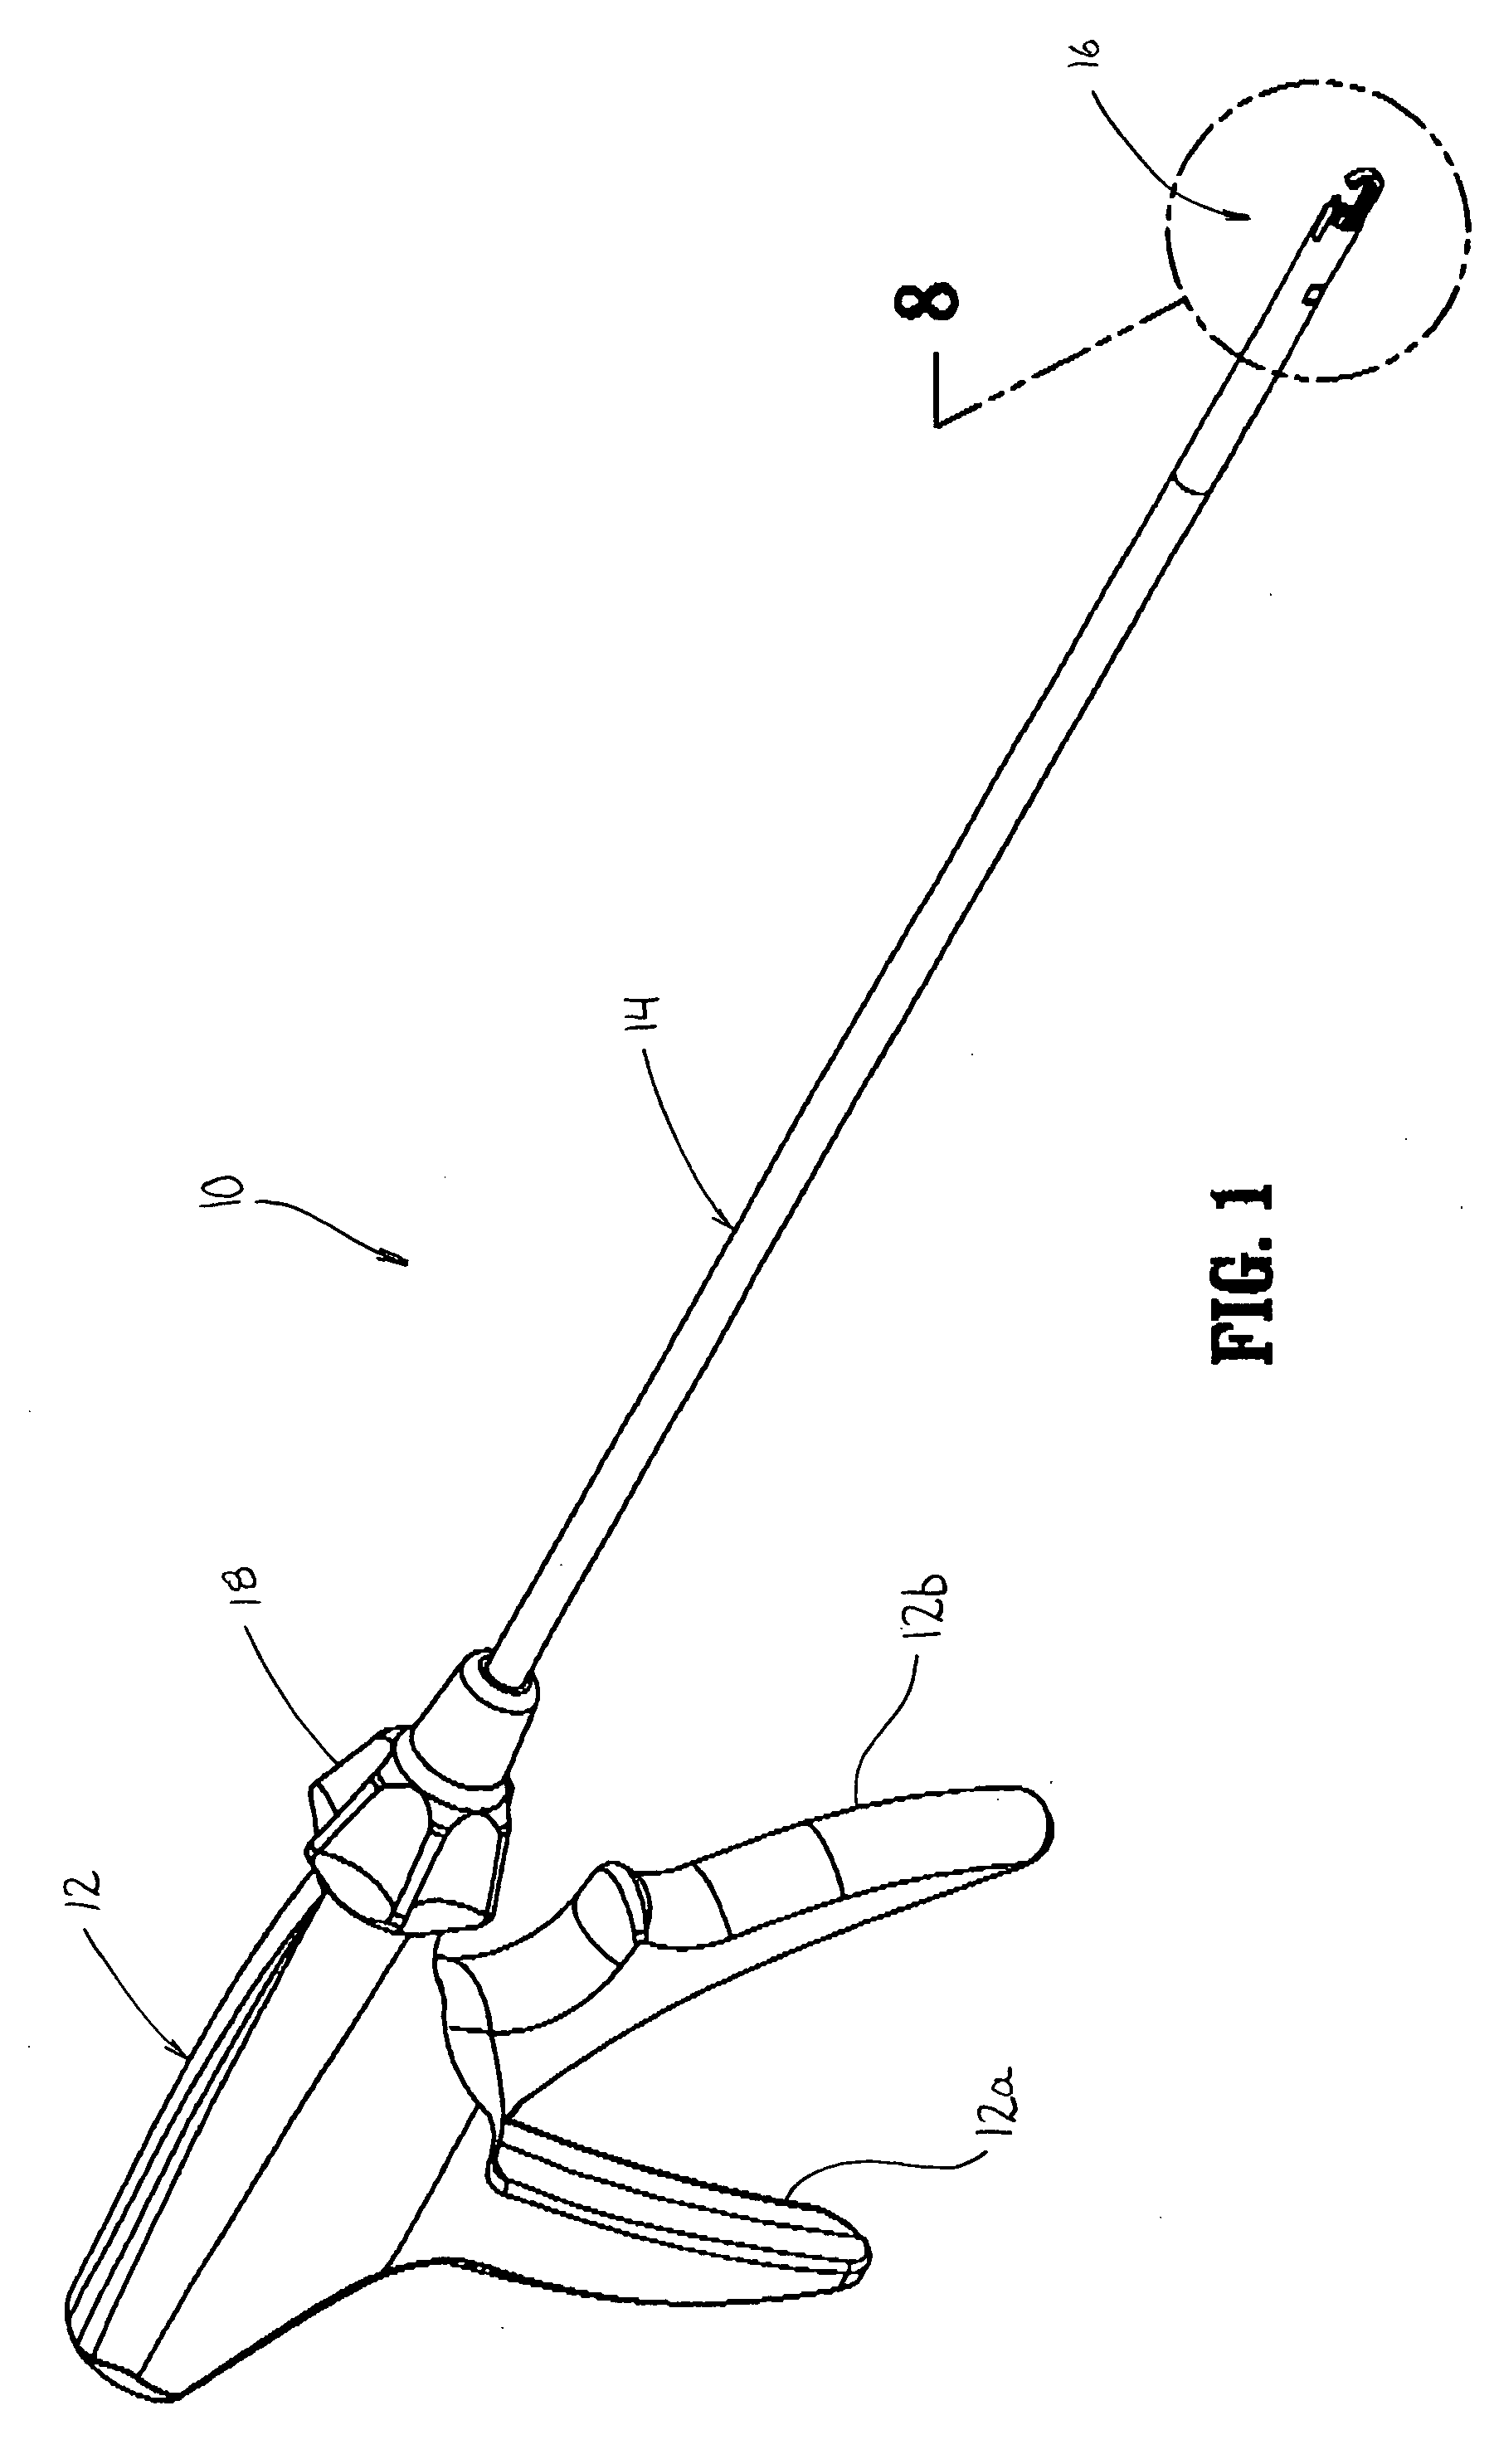 Clip applying apparatus and ligation clip